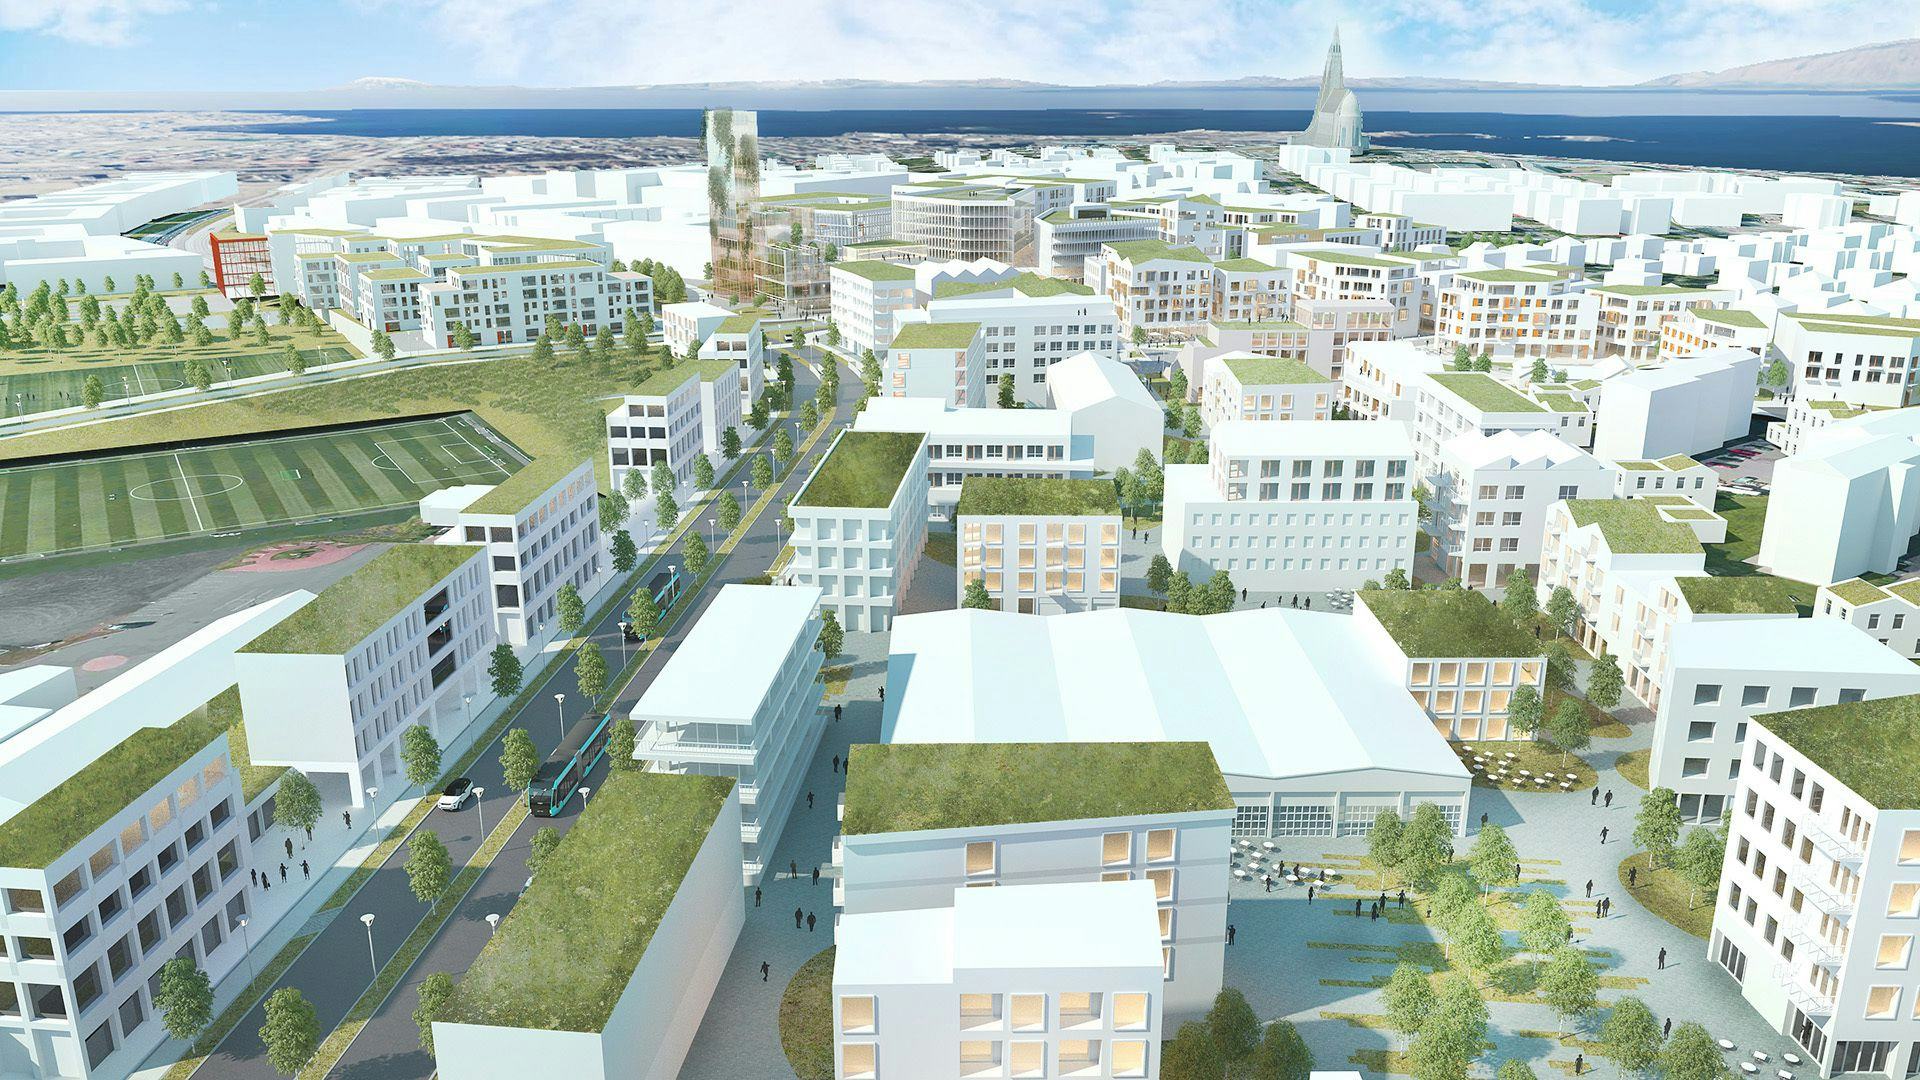 3D picture of urban development with white buildings